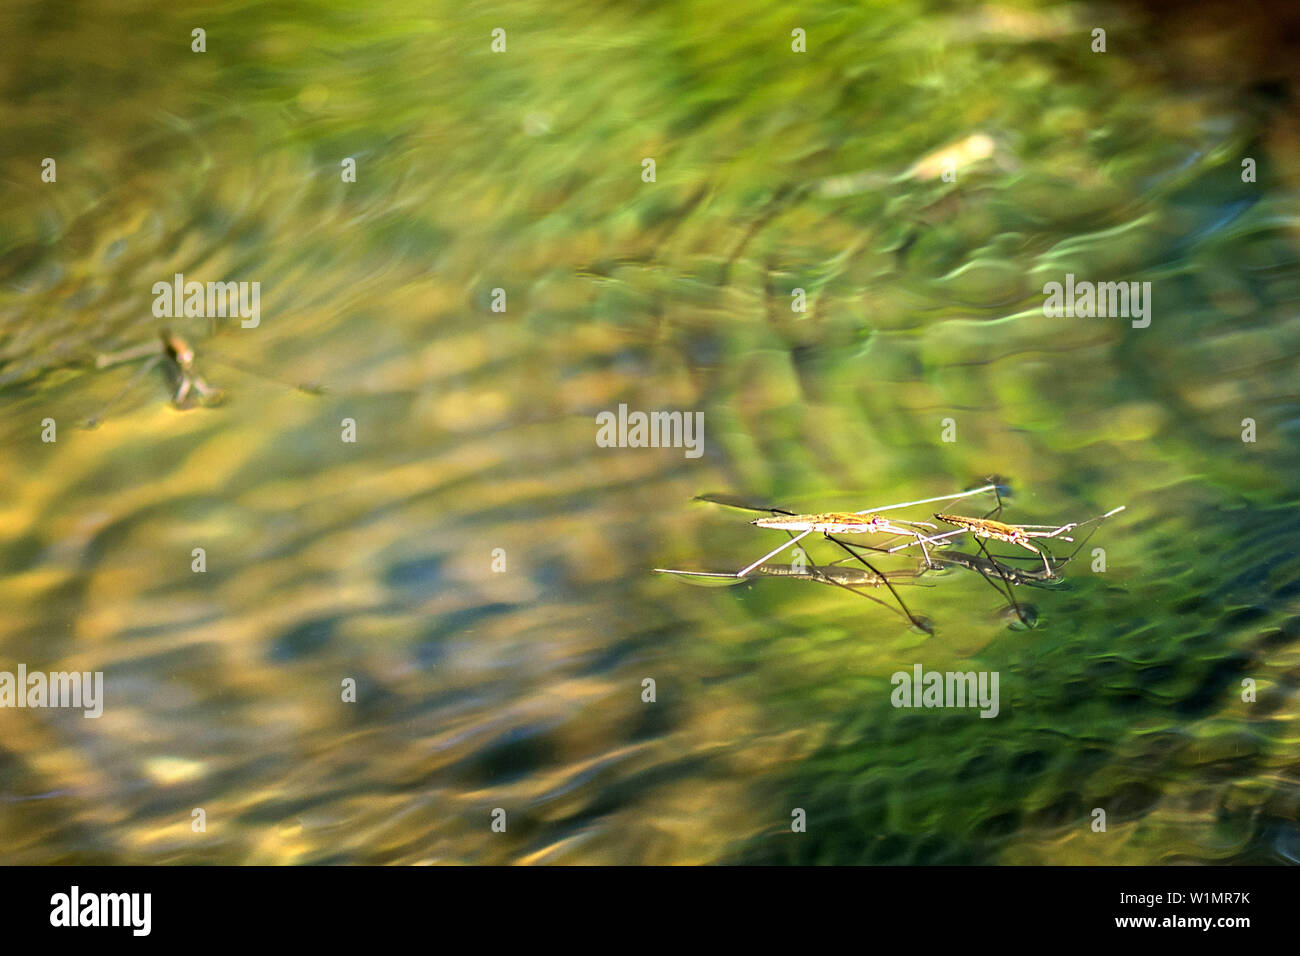 Close-ups of a water strider on the water surface, biosphere reserve, Schlepzig, Brandenburg, Germany Stock Photo